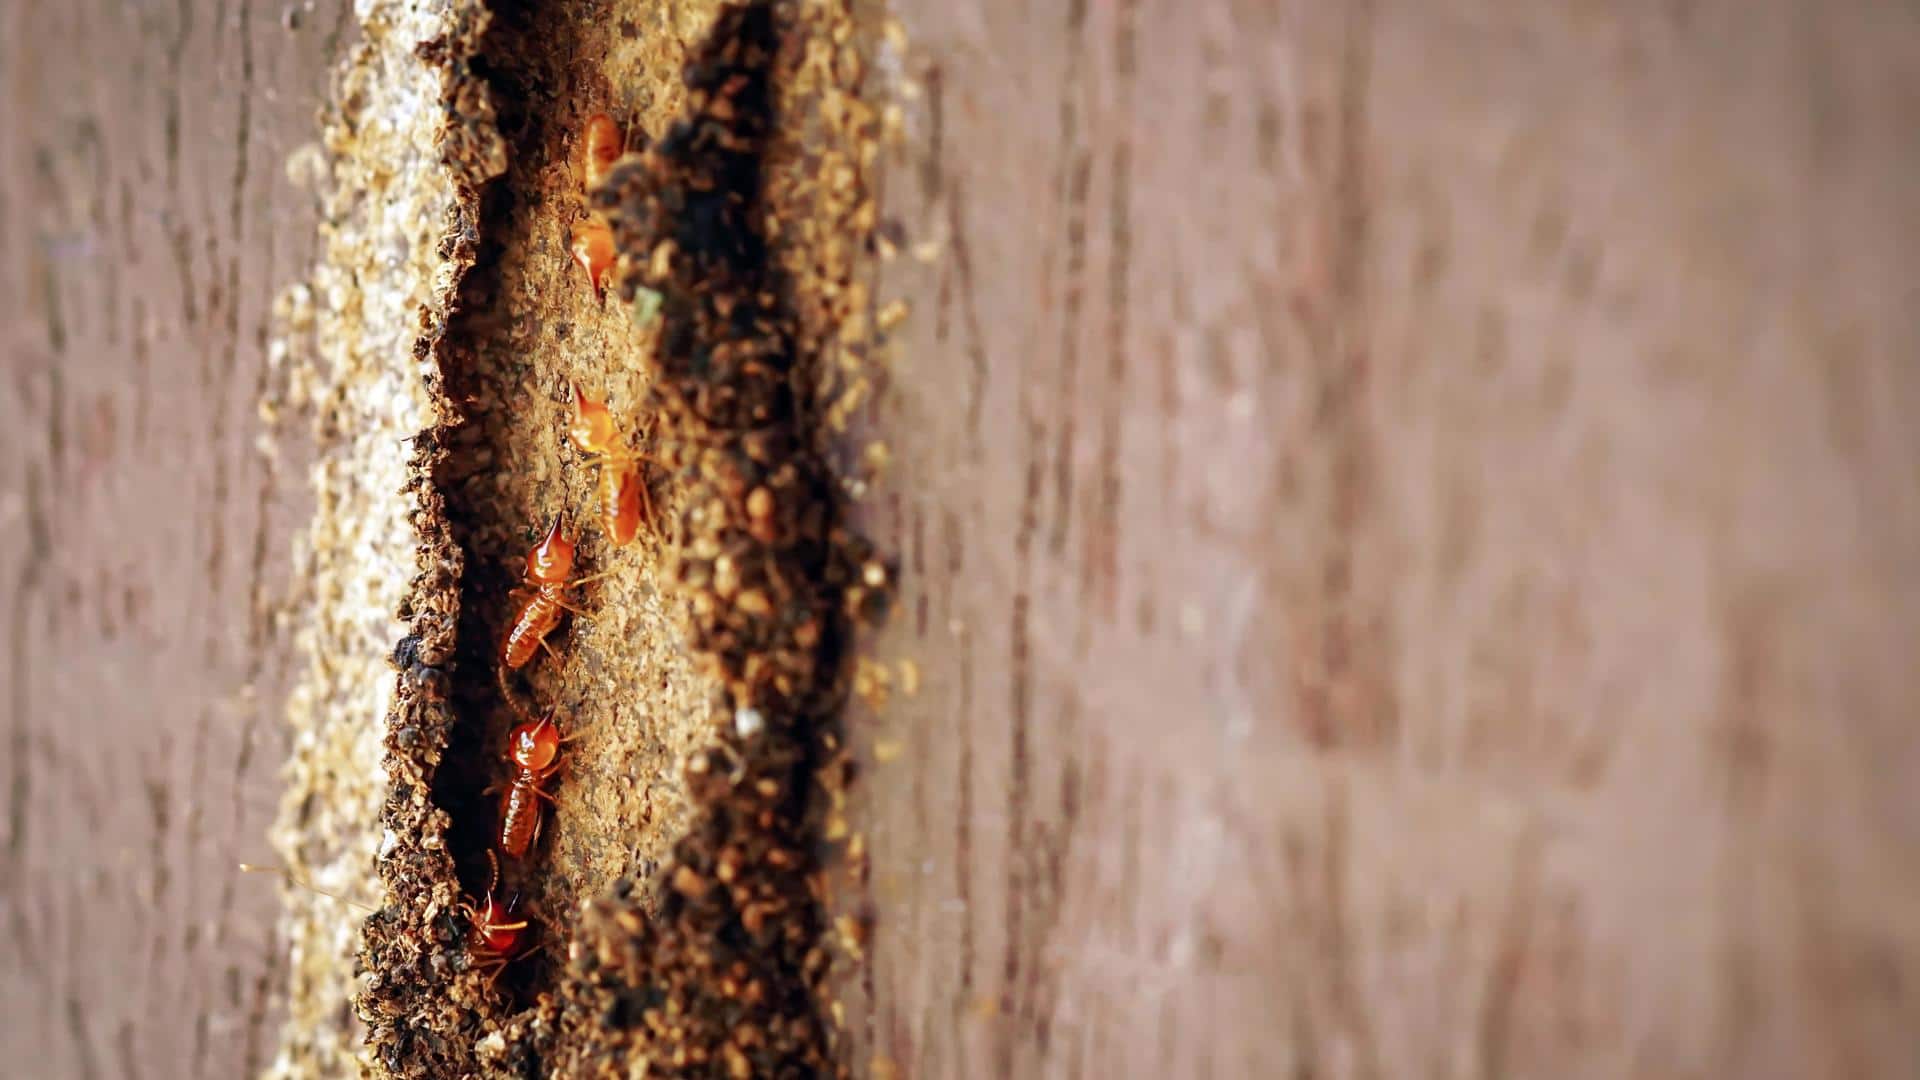 Termites at home? Try these natural remedies to remove them